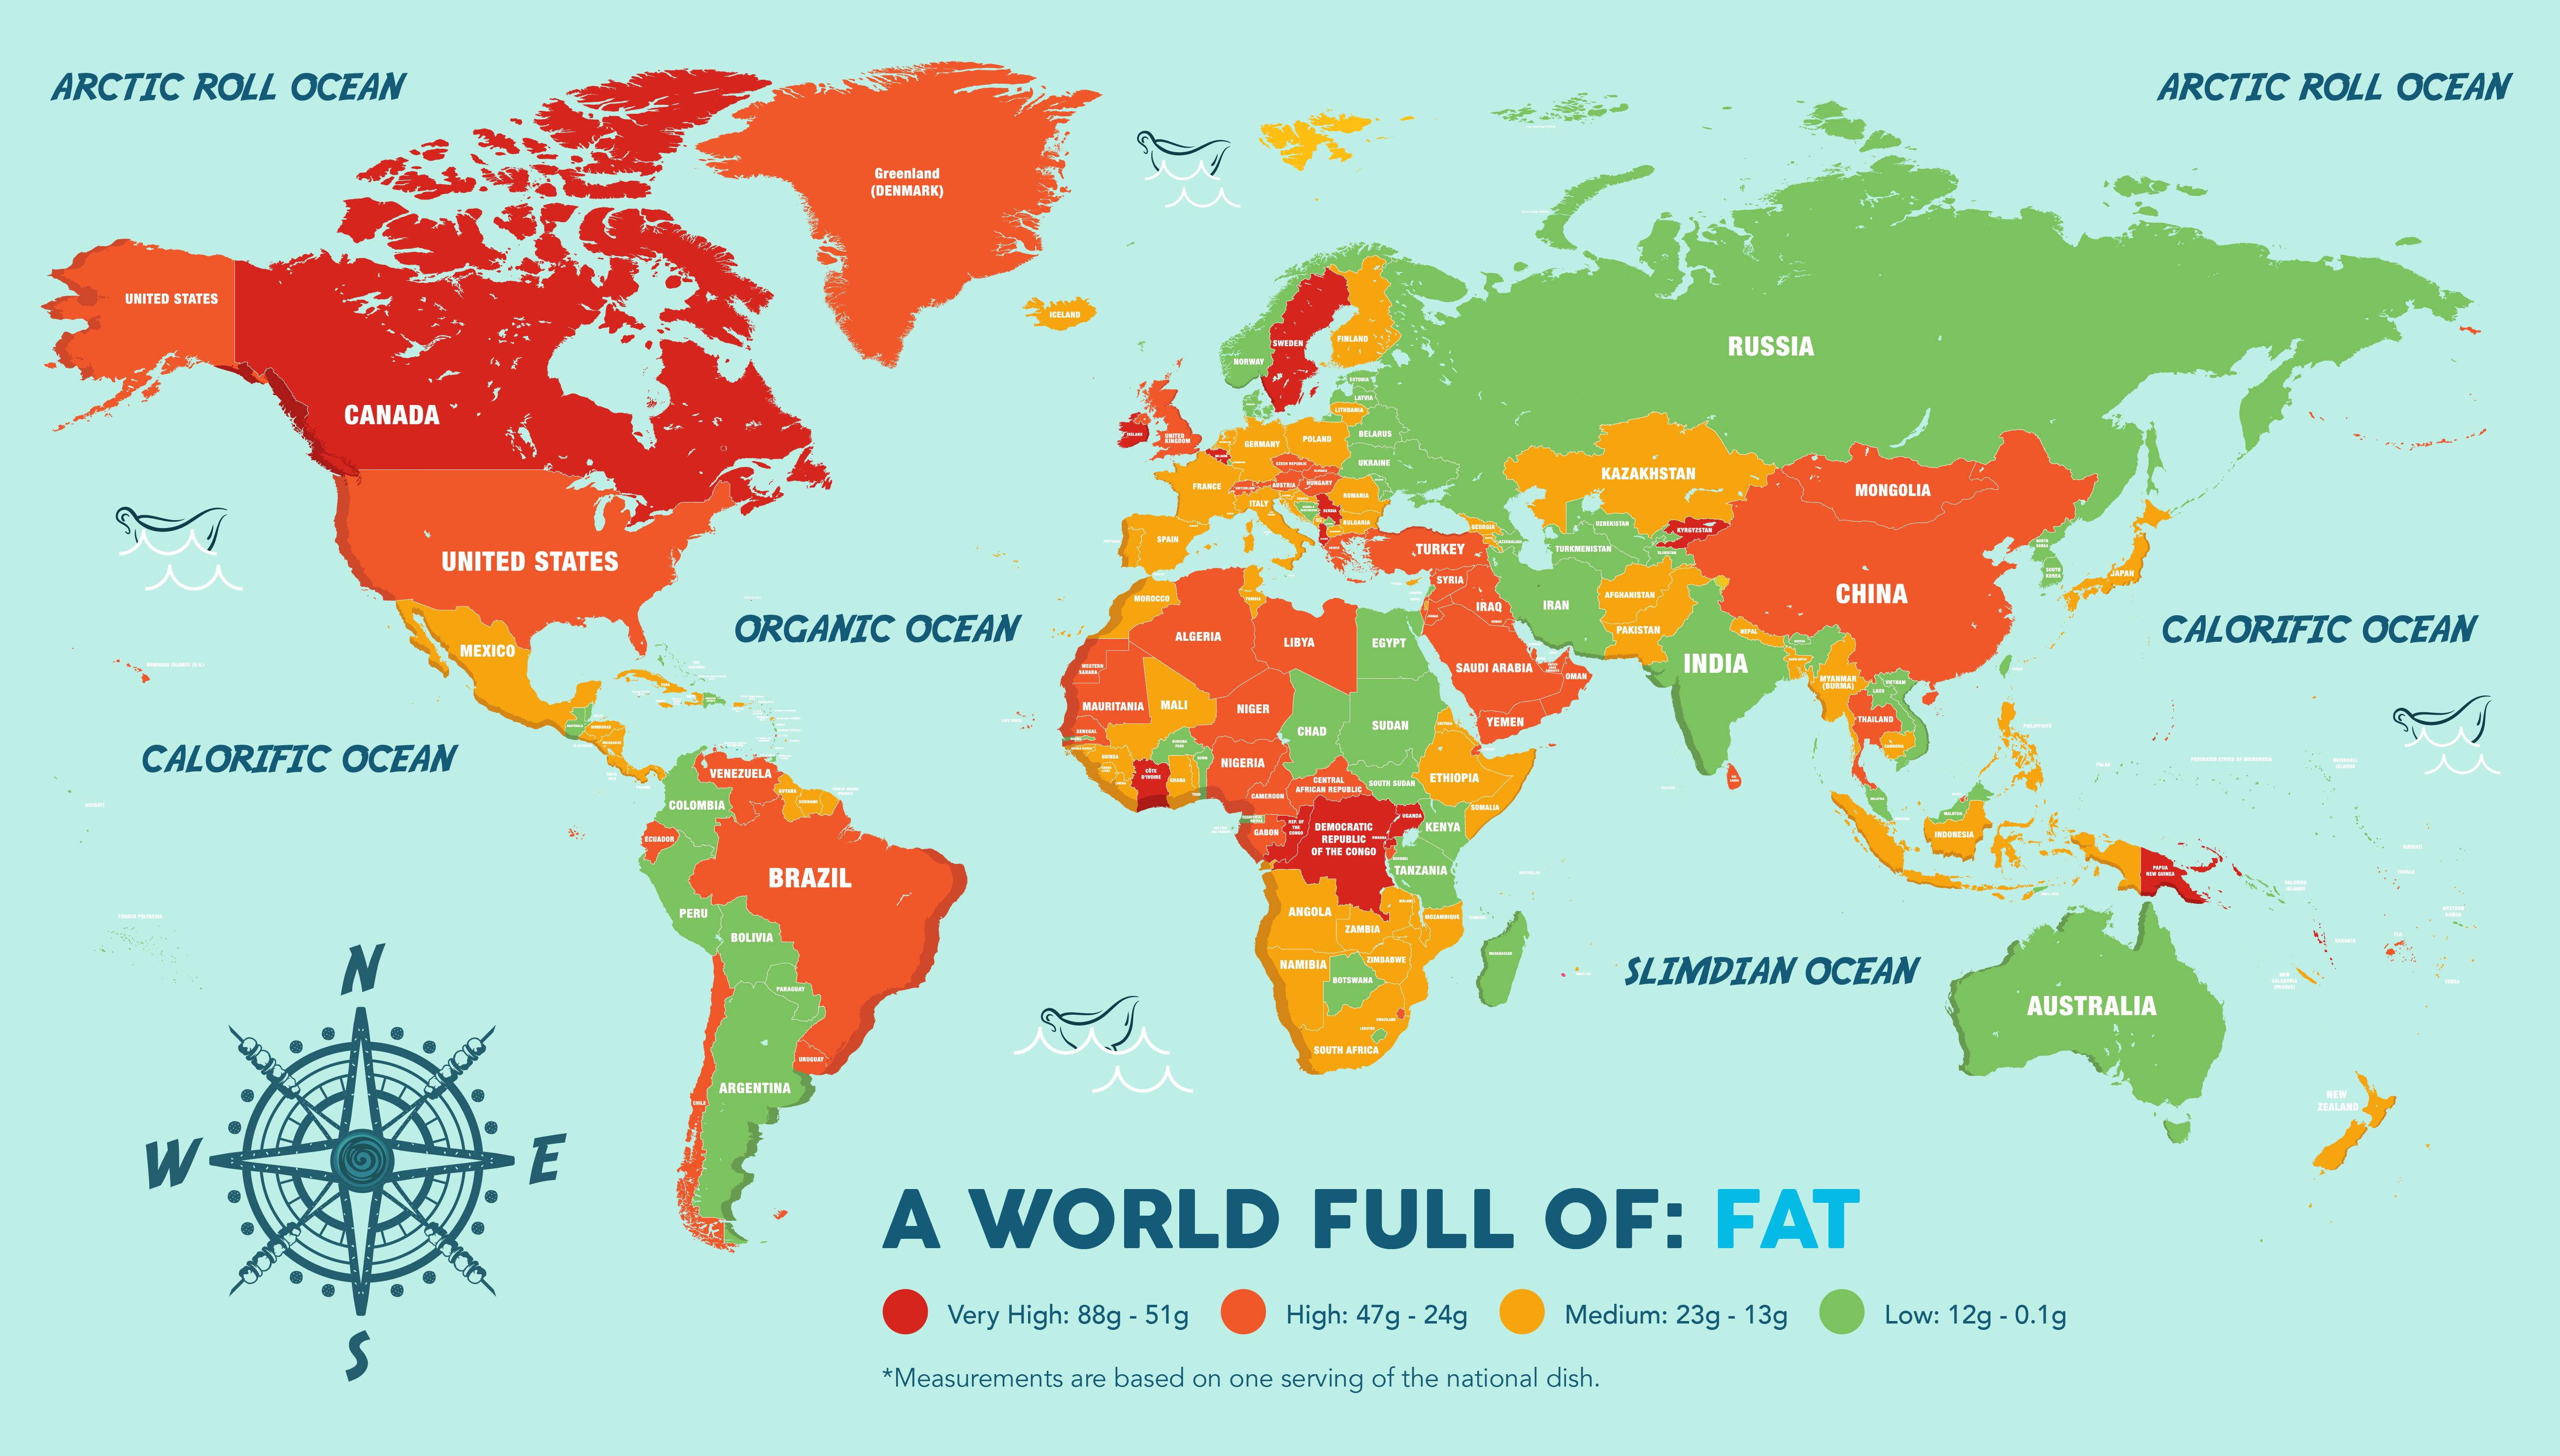 a world map showing national dishes by fat.